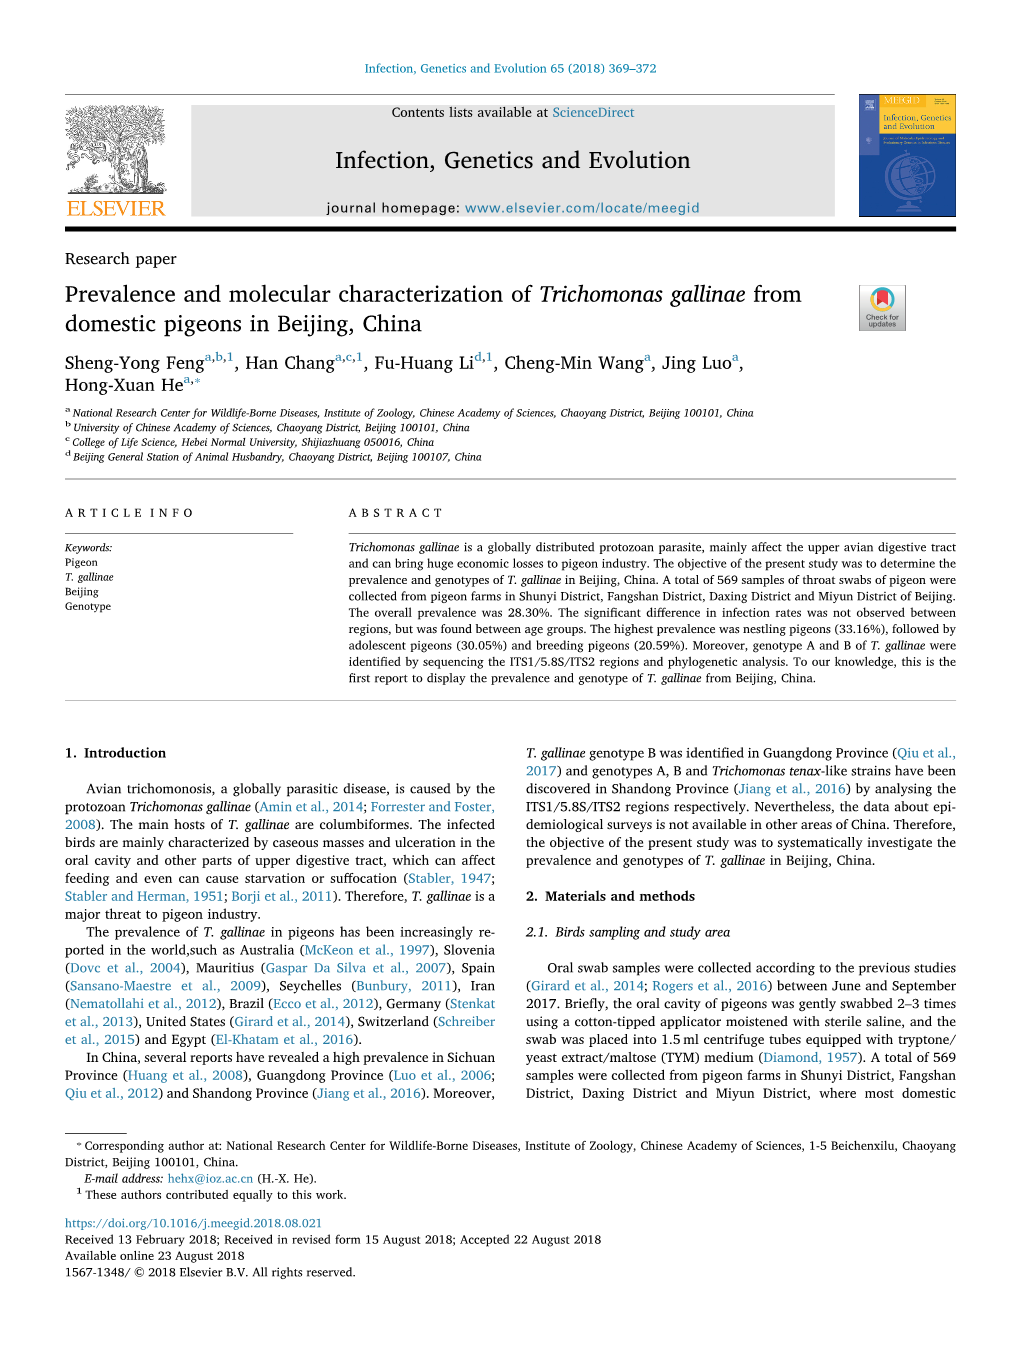 Prevalence and Molecular Characterization of Trichomonas Gallinae from Domestic Pigeons in Beijing, China T